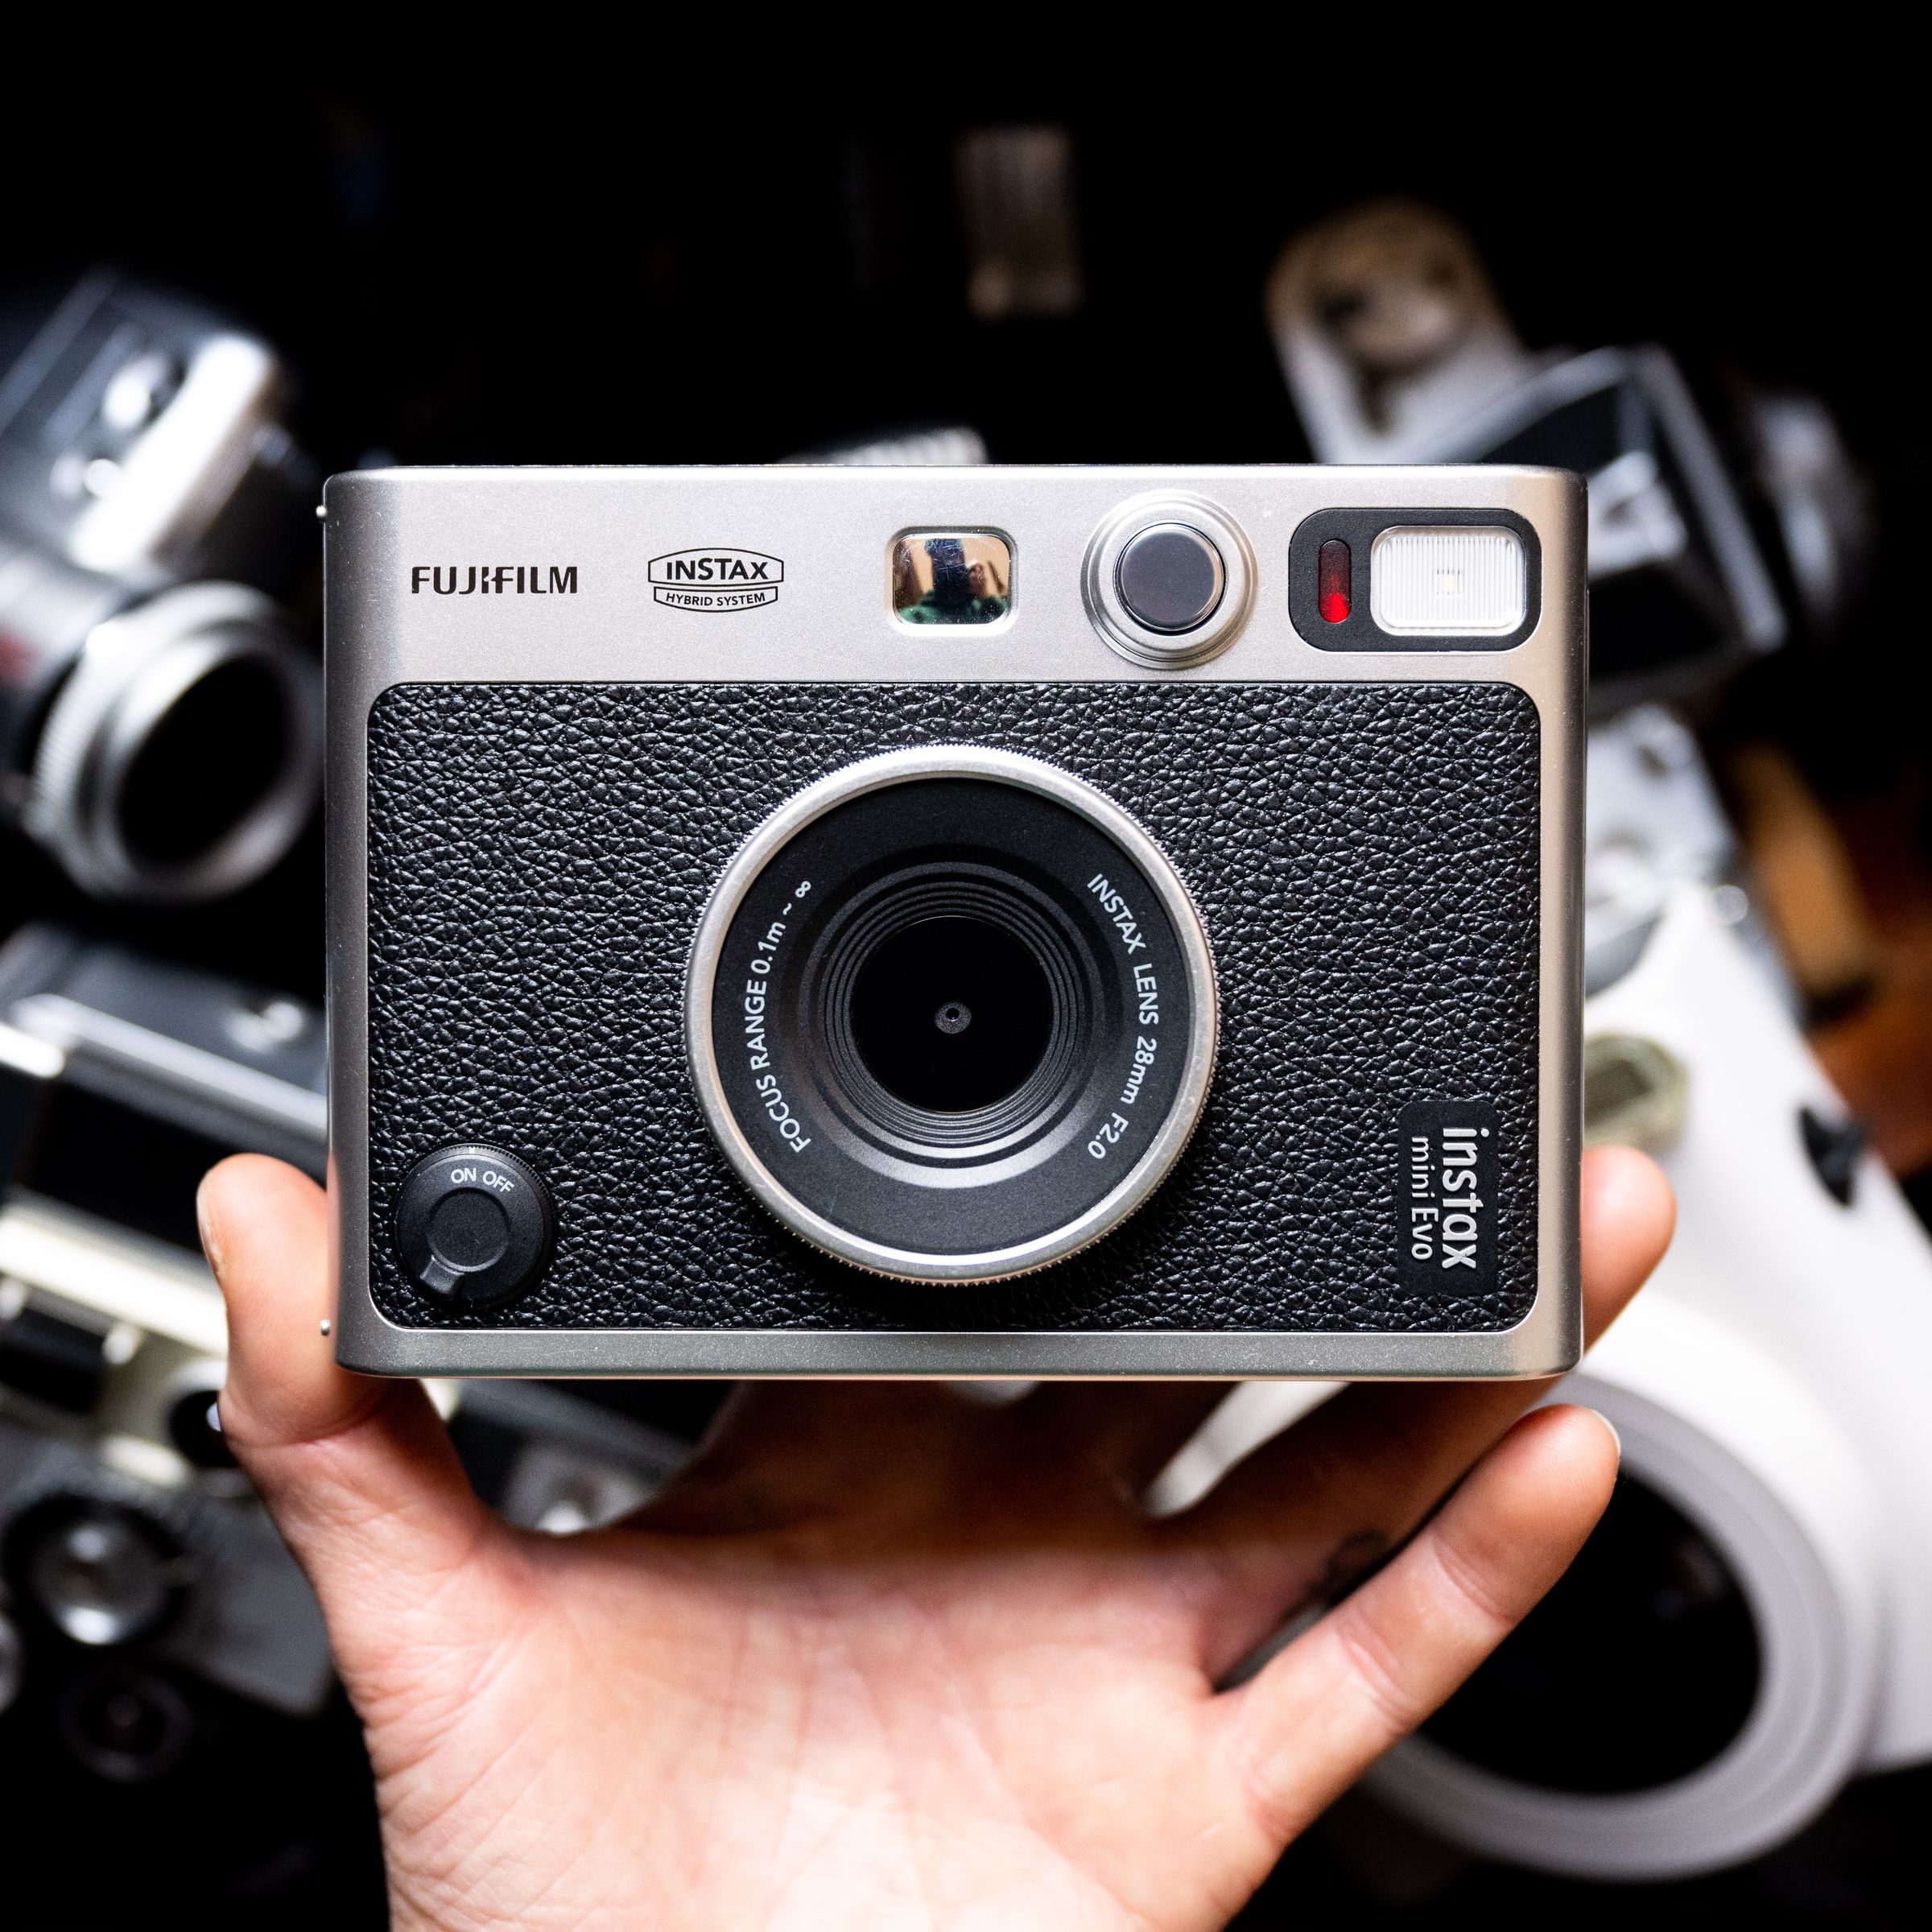 The Instax Mini Evo being held up with a hand against a dark background with cameras that are out of focus.